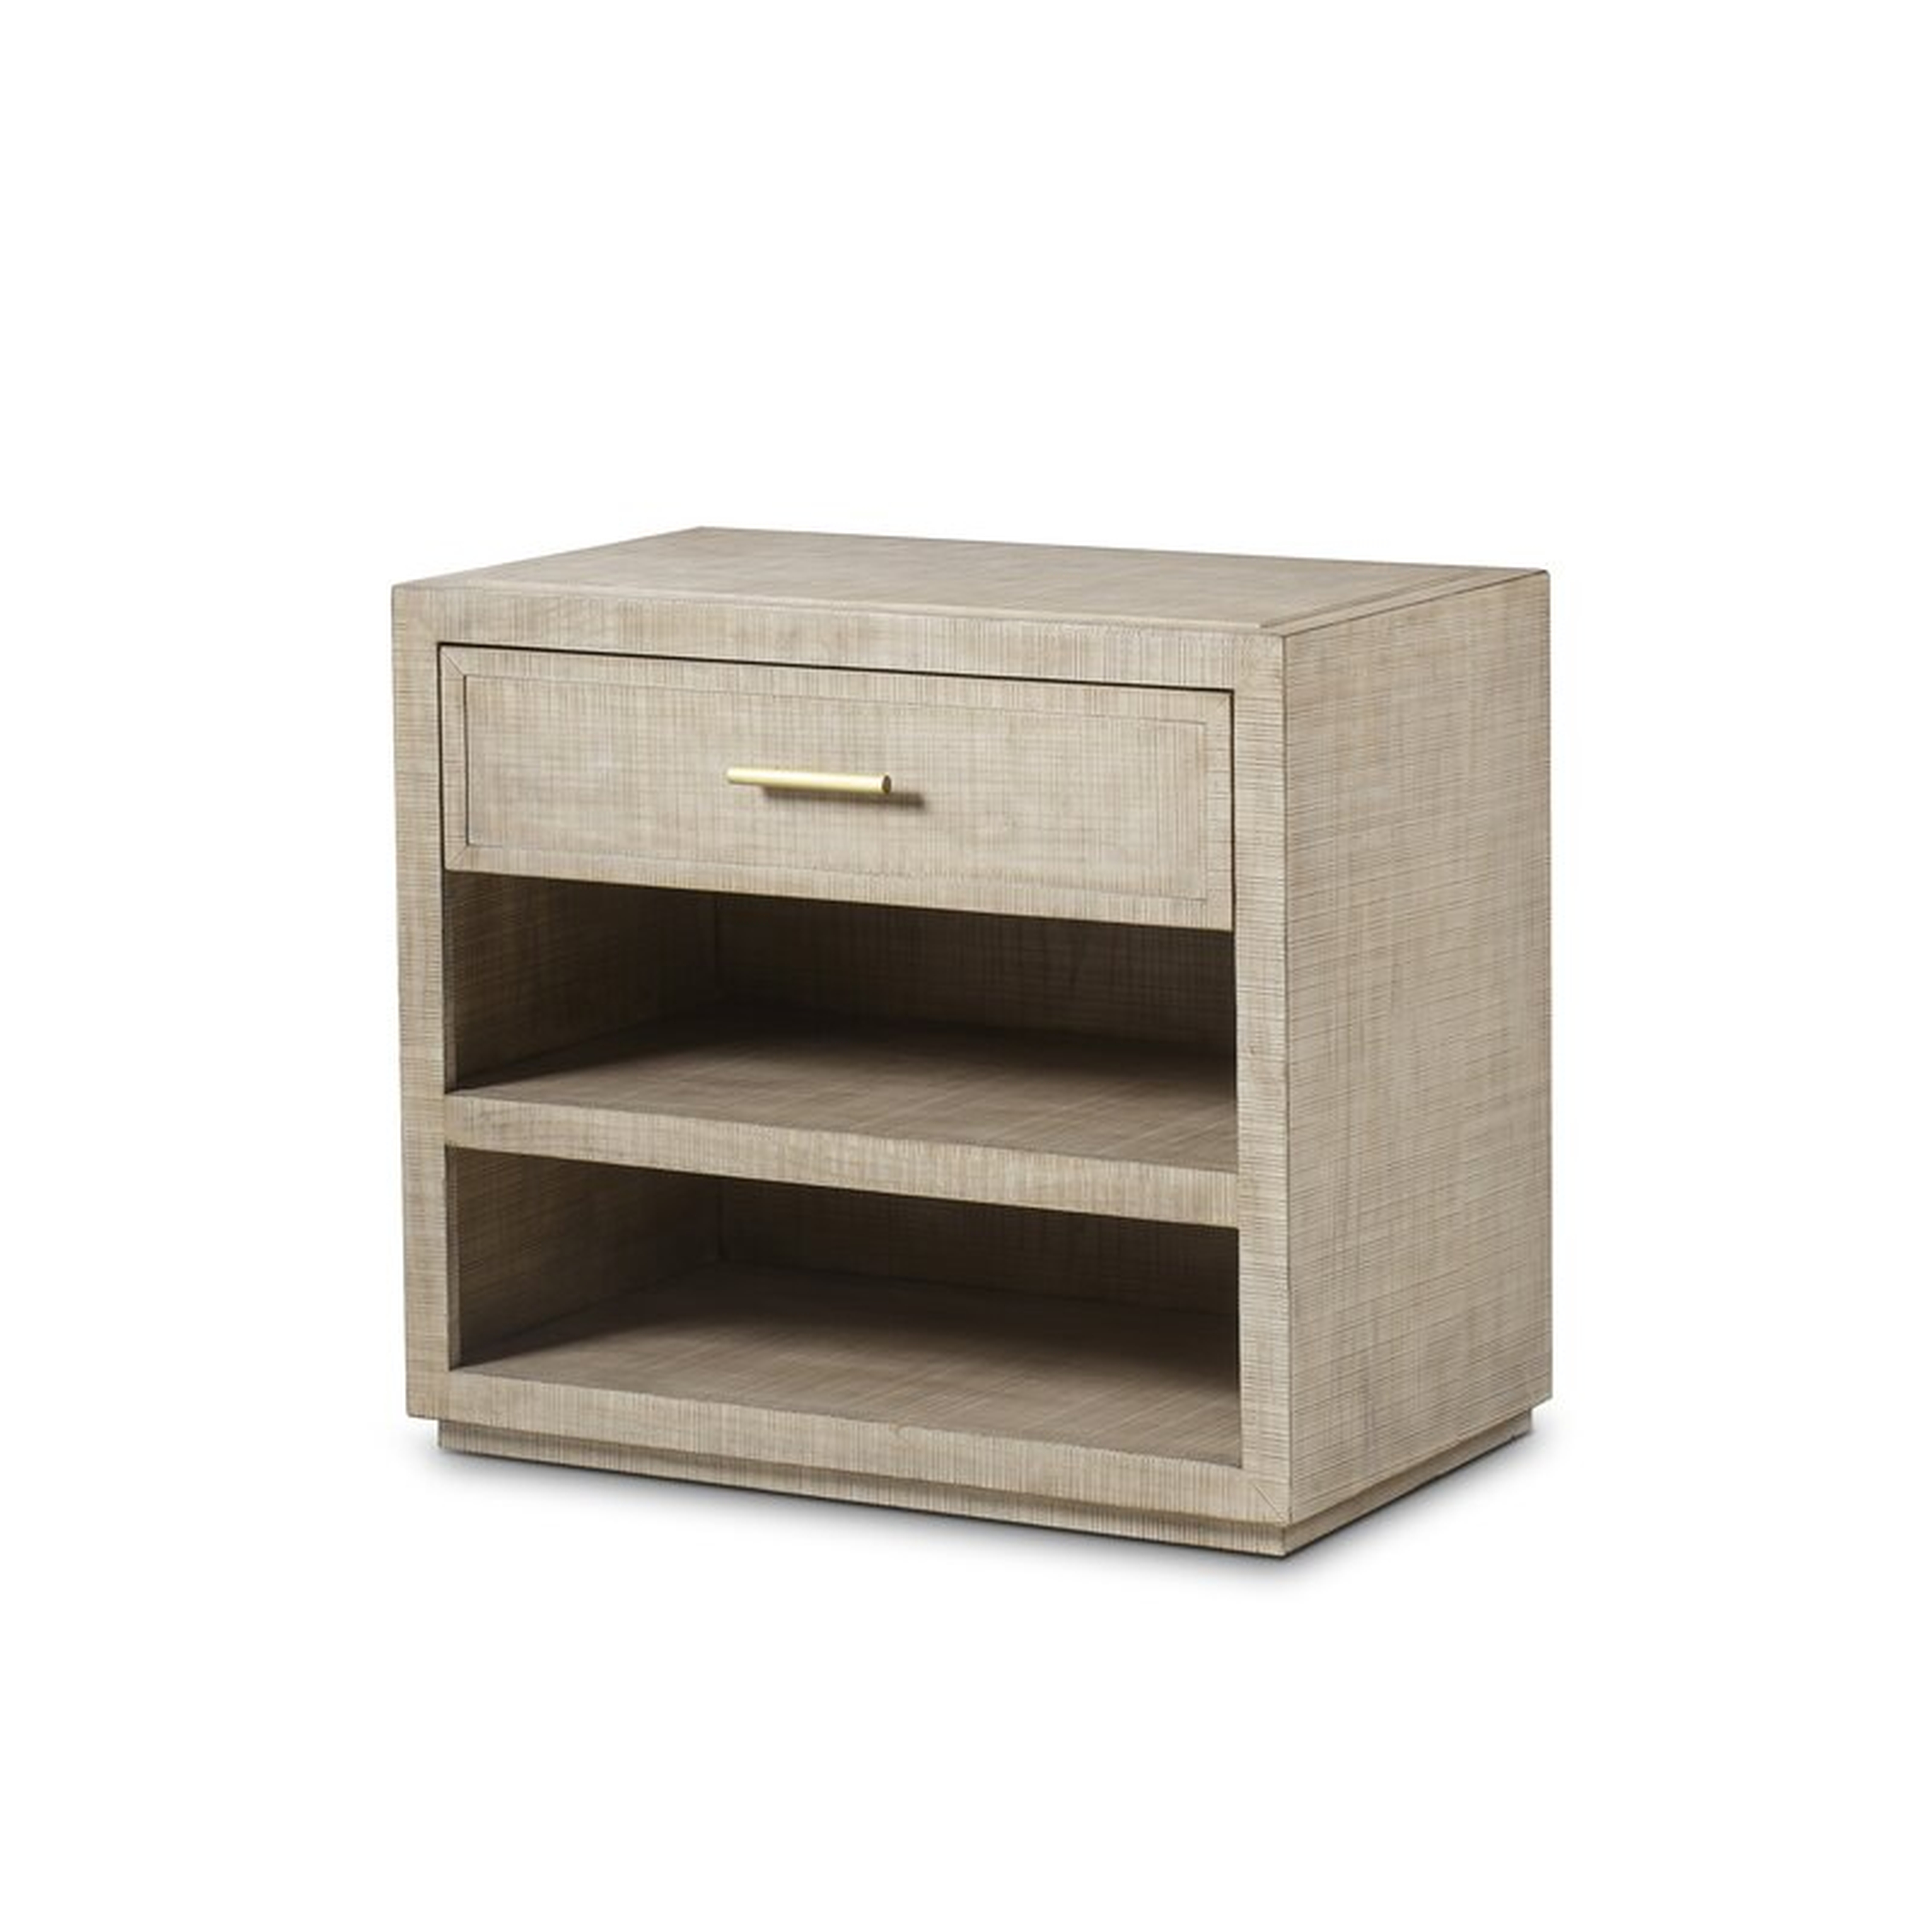 Sonder Living Maison 55 1 - Drawer Nightstand in Natural - Perigold